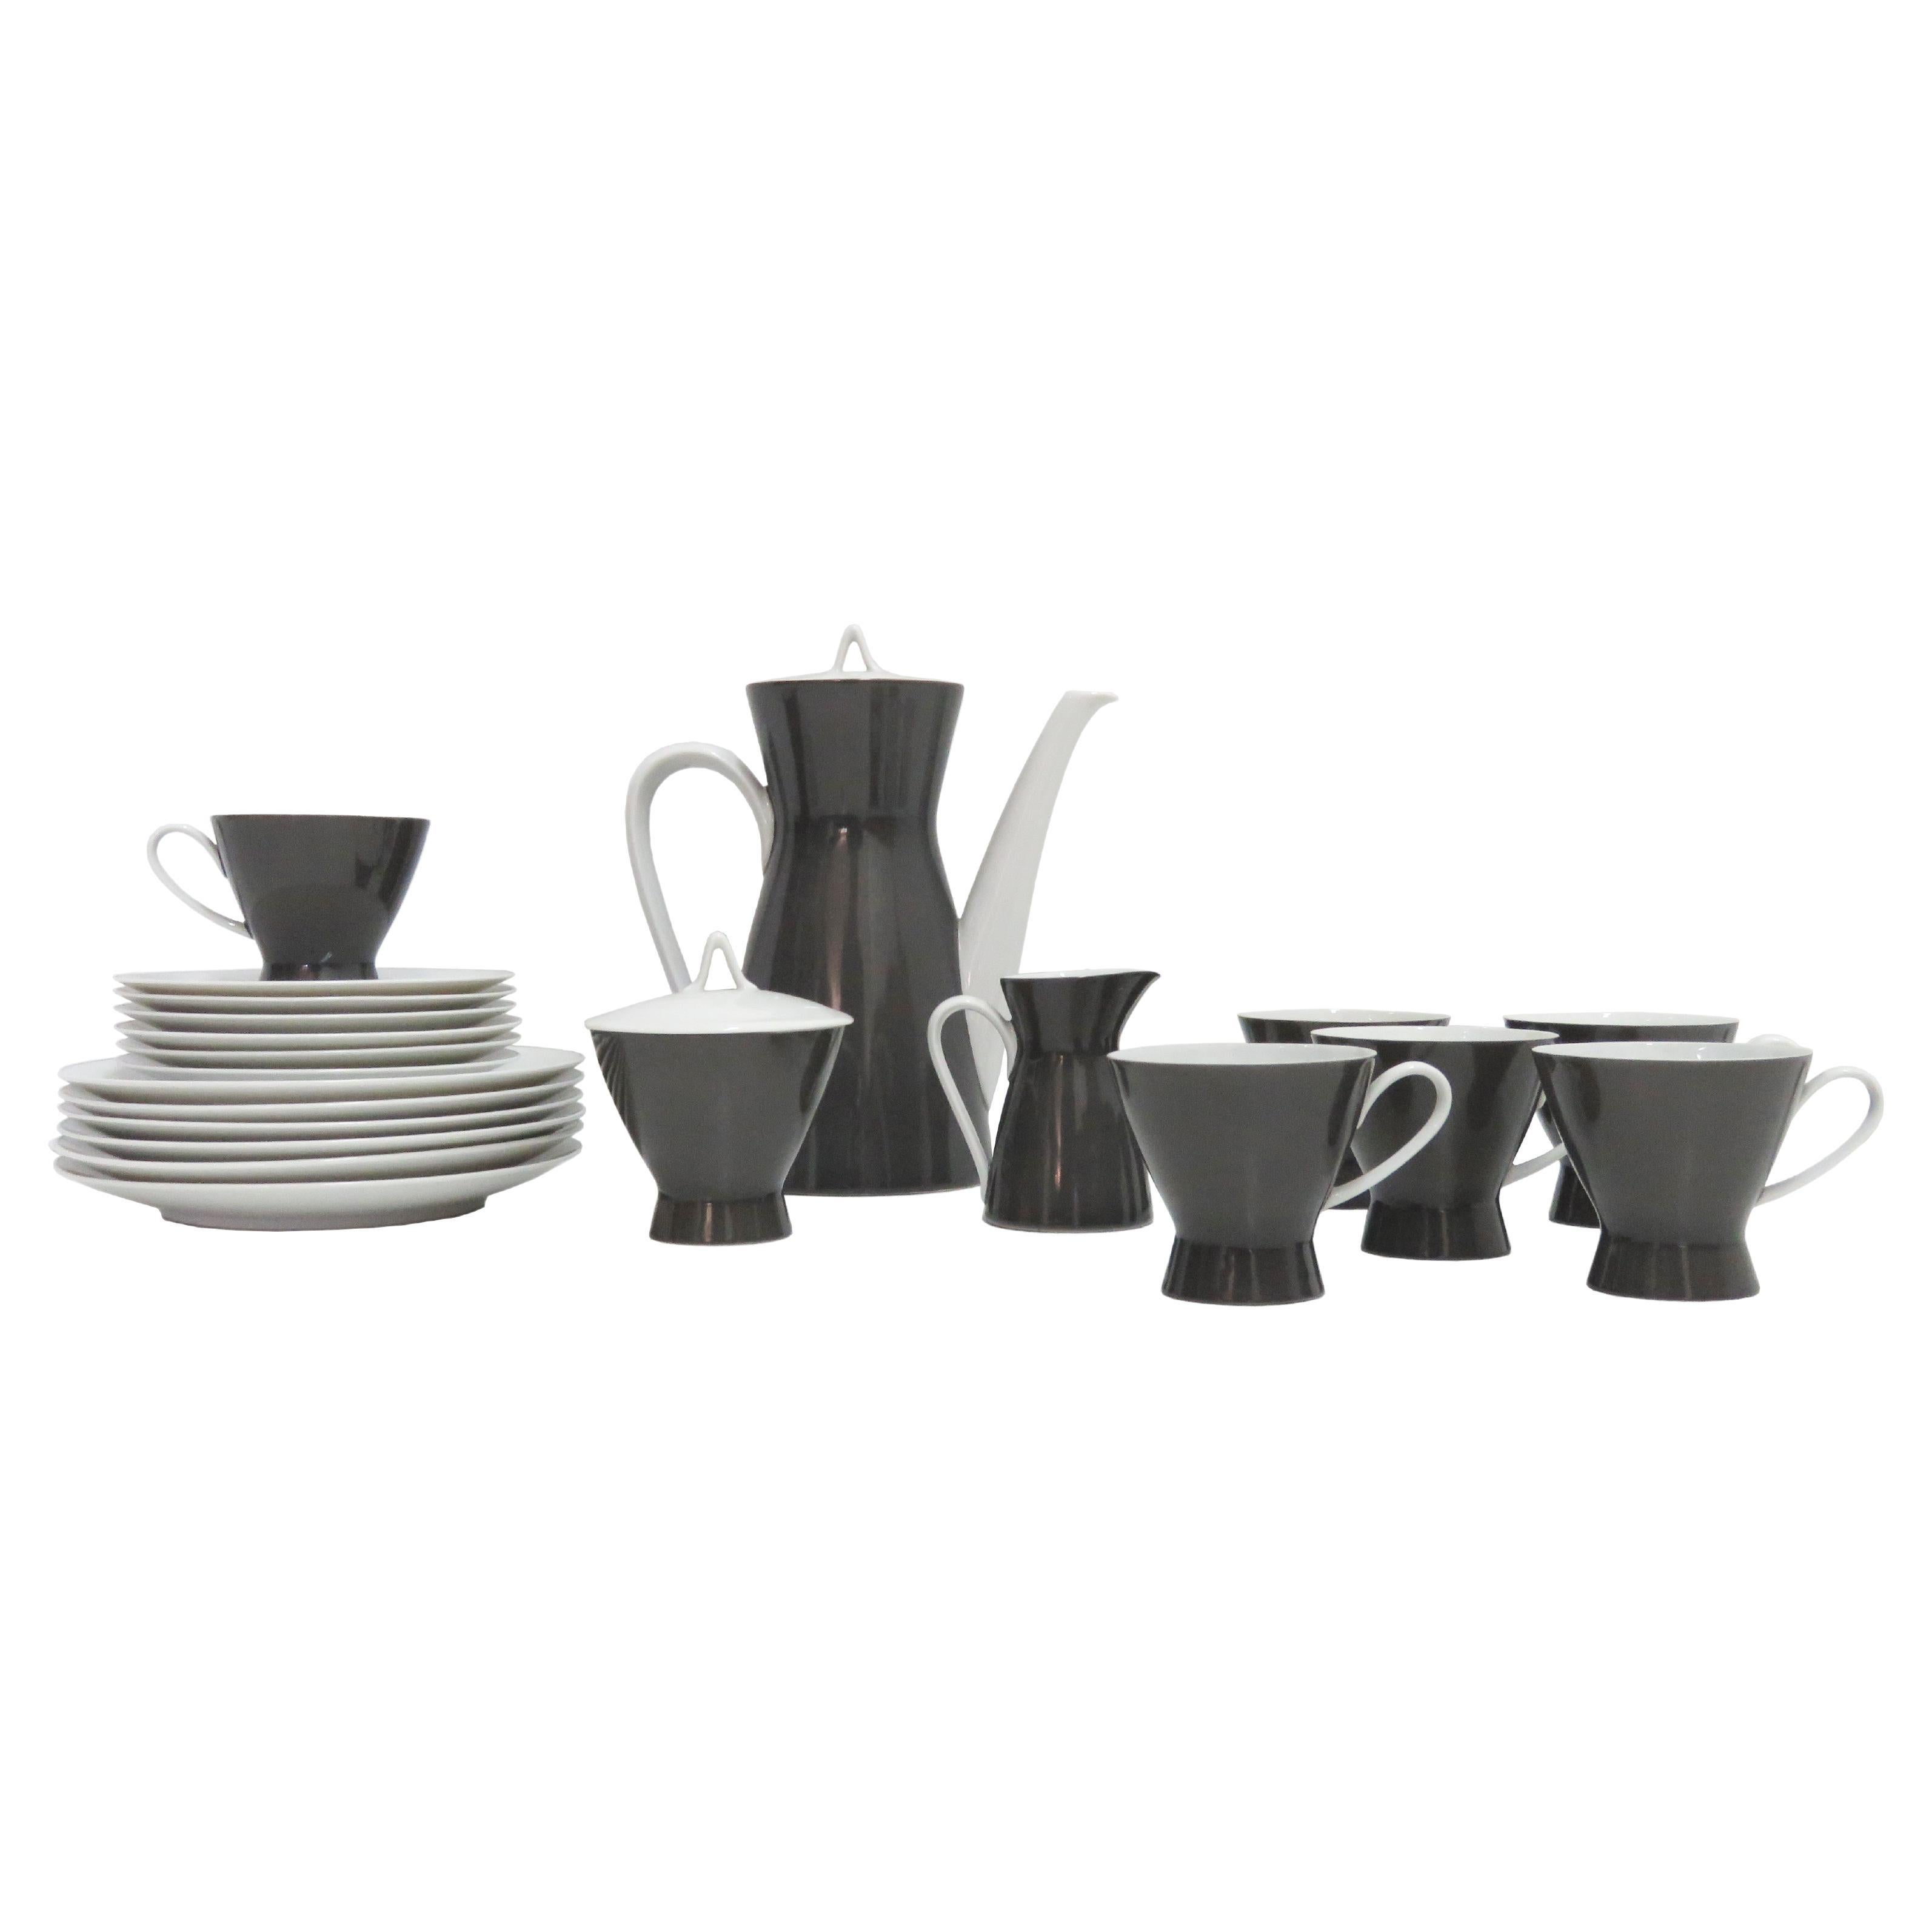 Raymond Loewy After Dinner Coffee Set for "Rosenthal 2000", 1954 For Sale